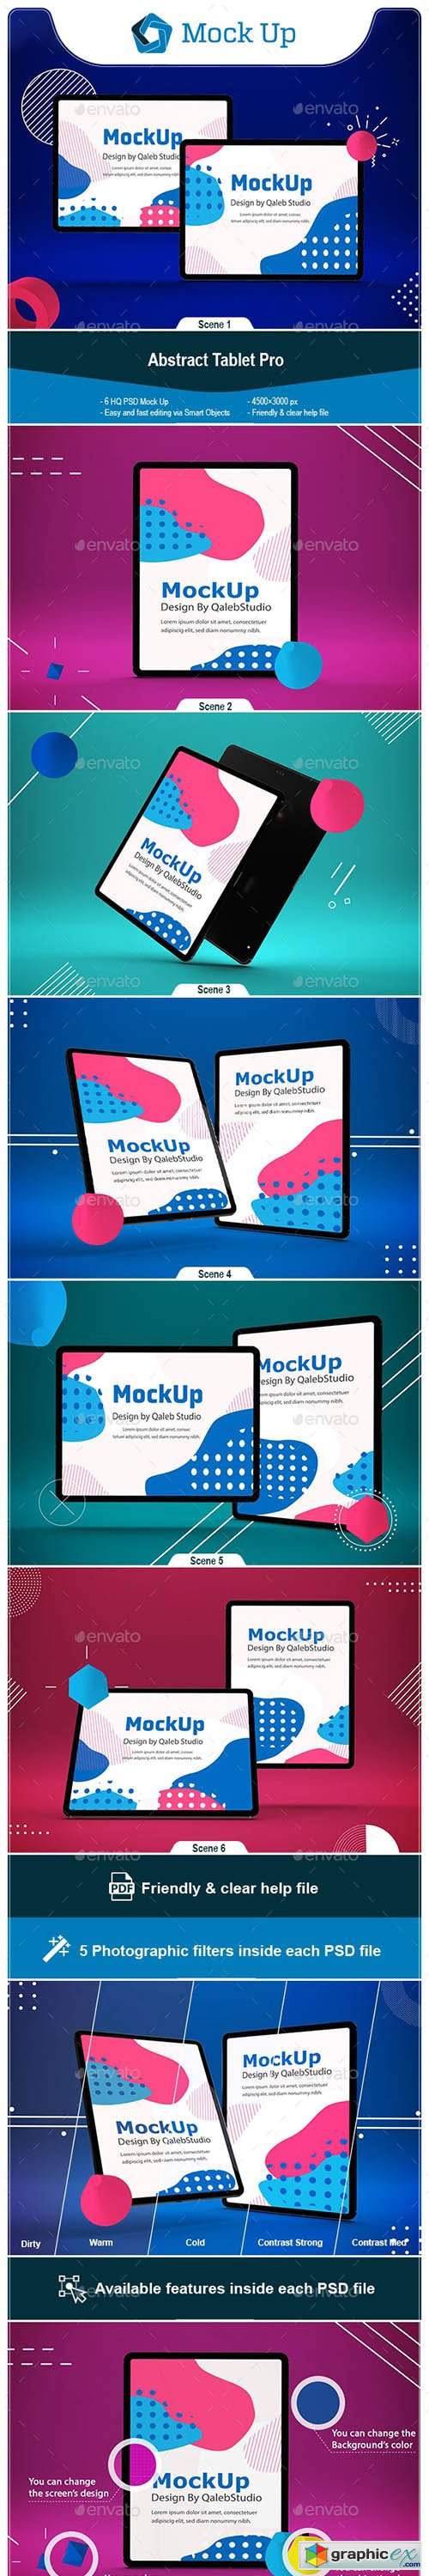 Abstract Tablet Pro Mockup